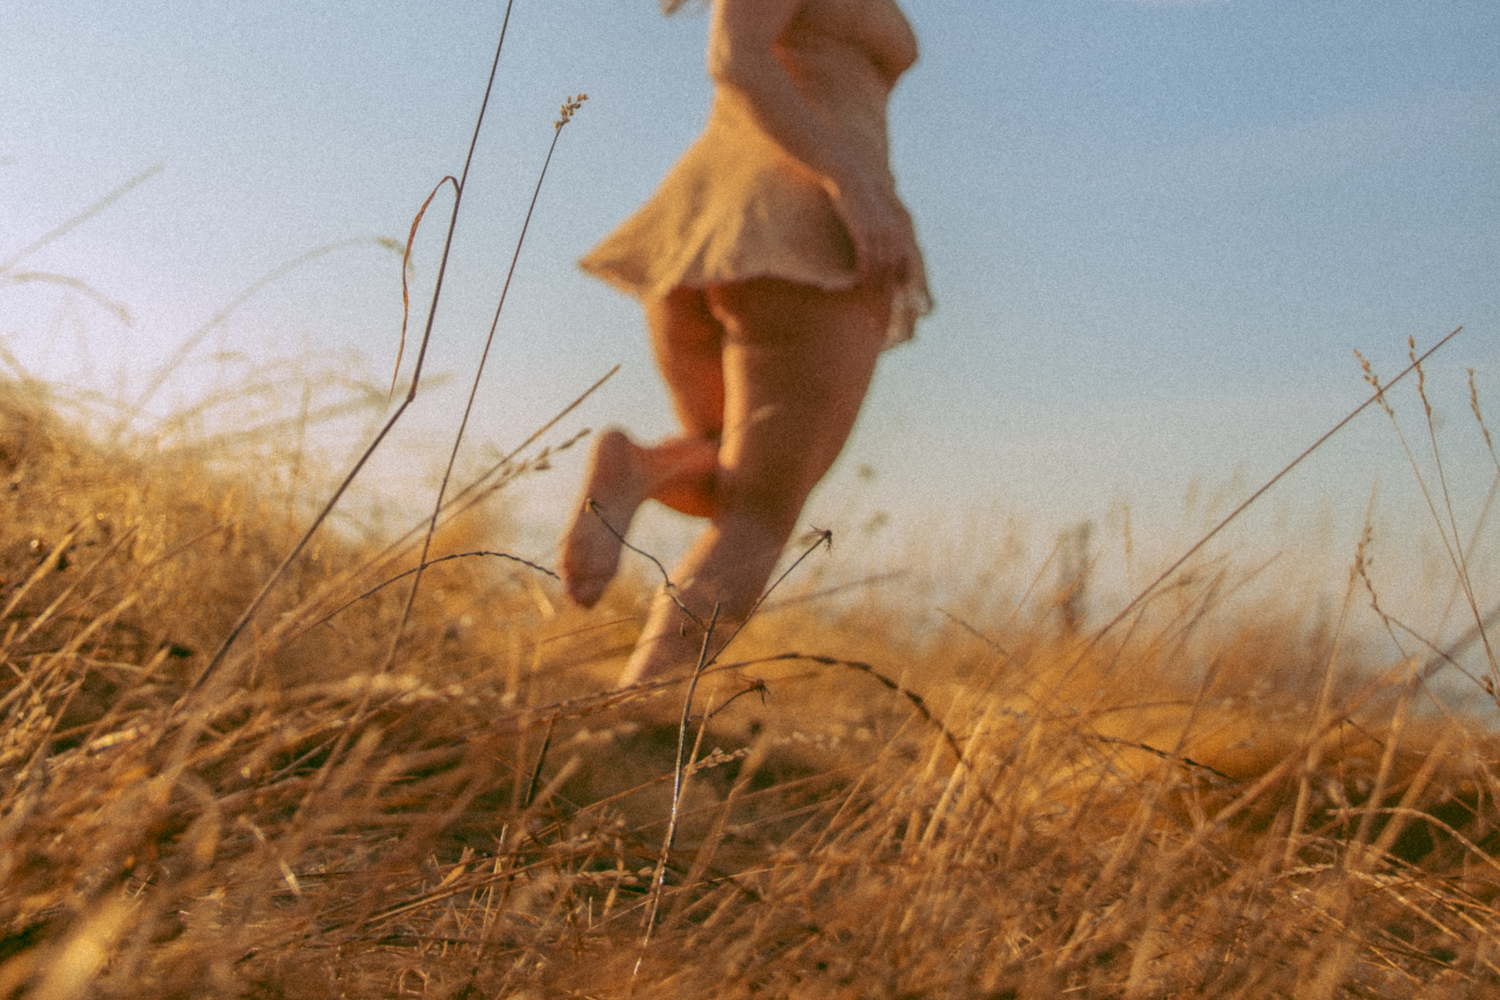 Model is running away from the camera in a field, her head is cut off. Tall yellow grass is in focus in the foreground, blue sky in the background. Lau is wearing a beige slip.